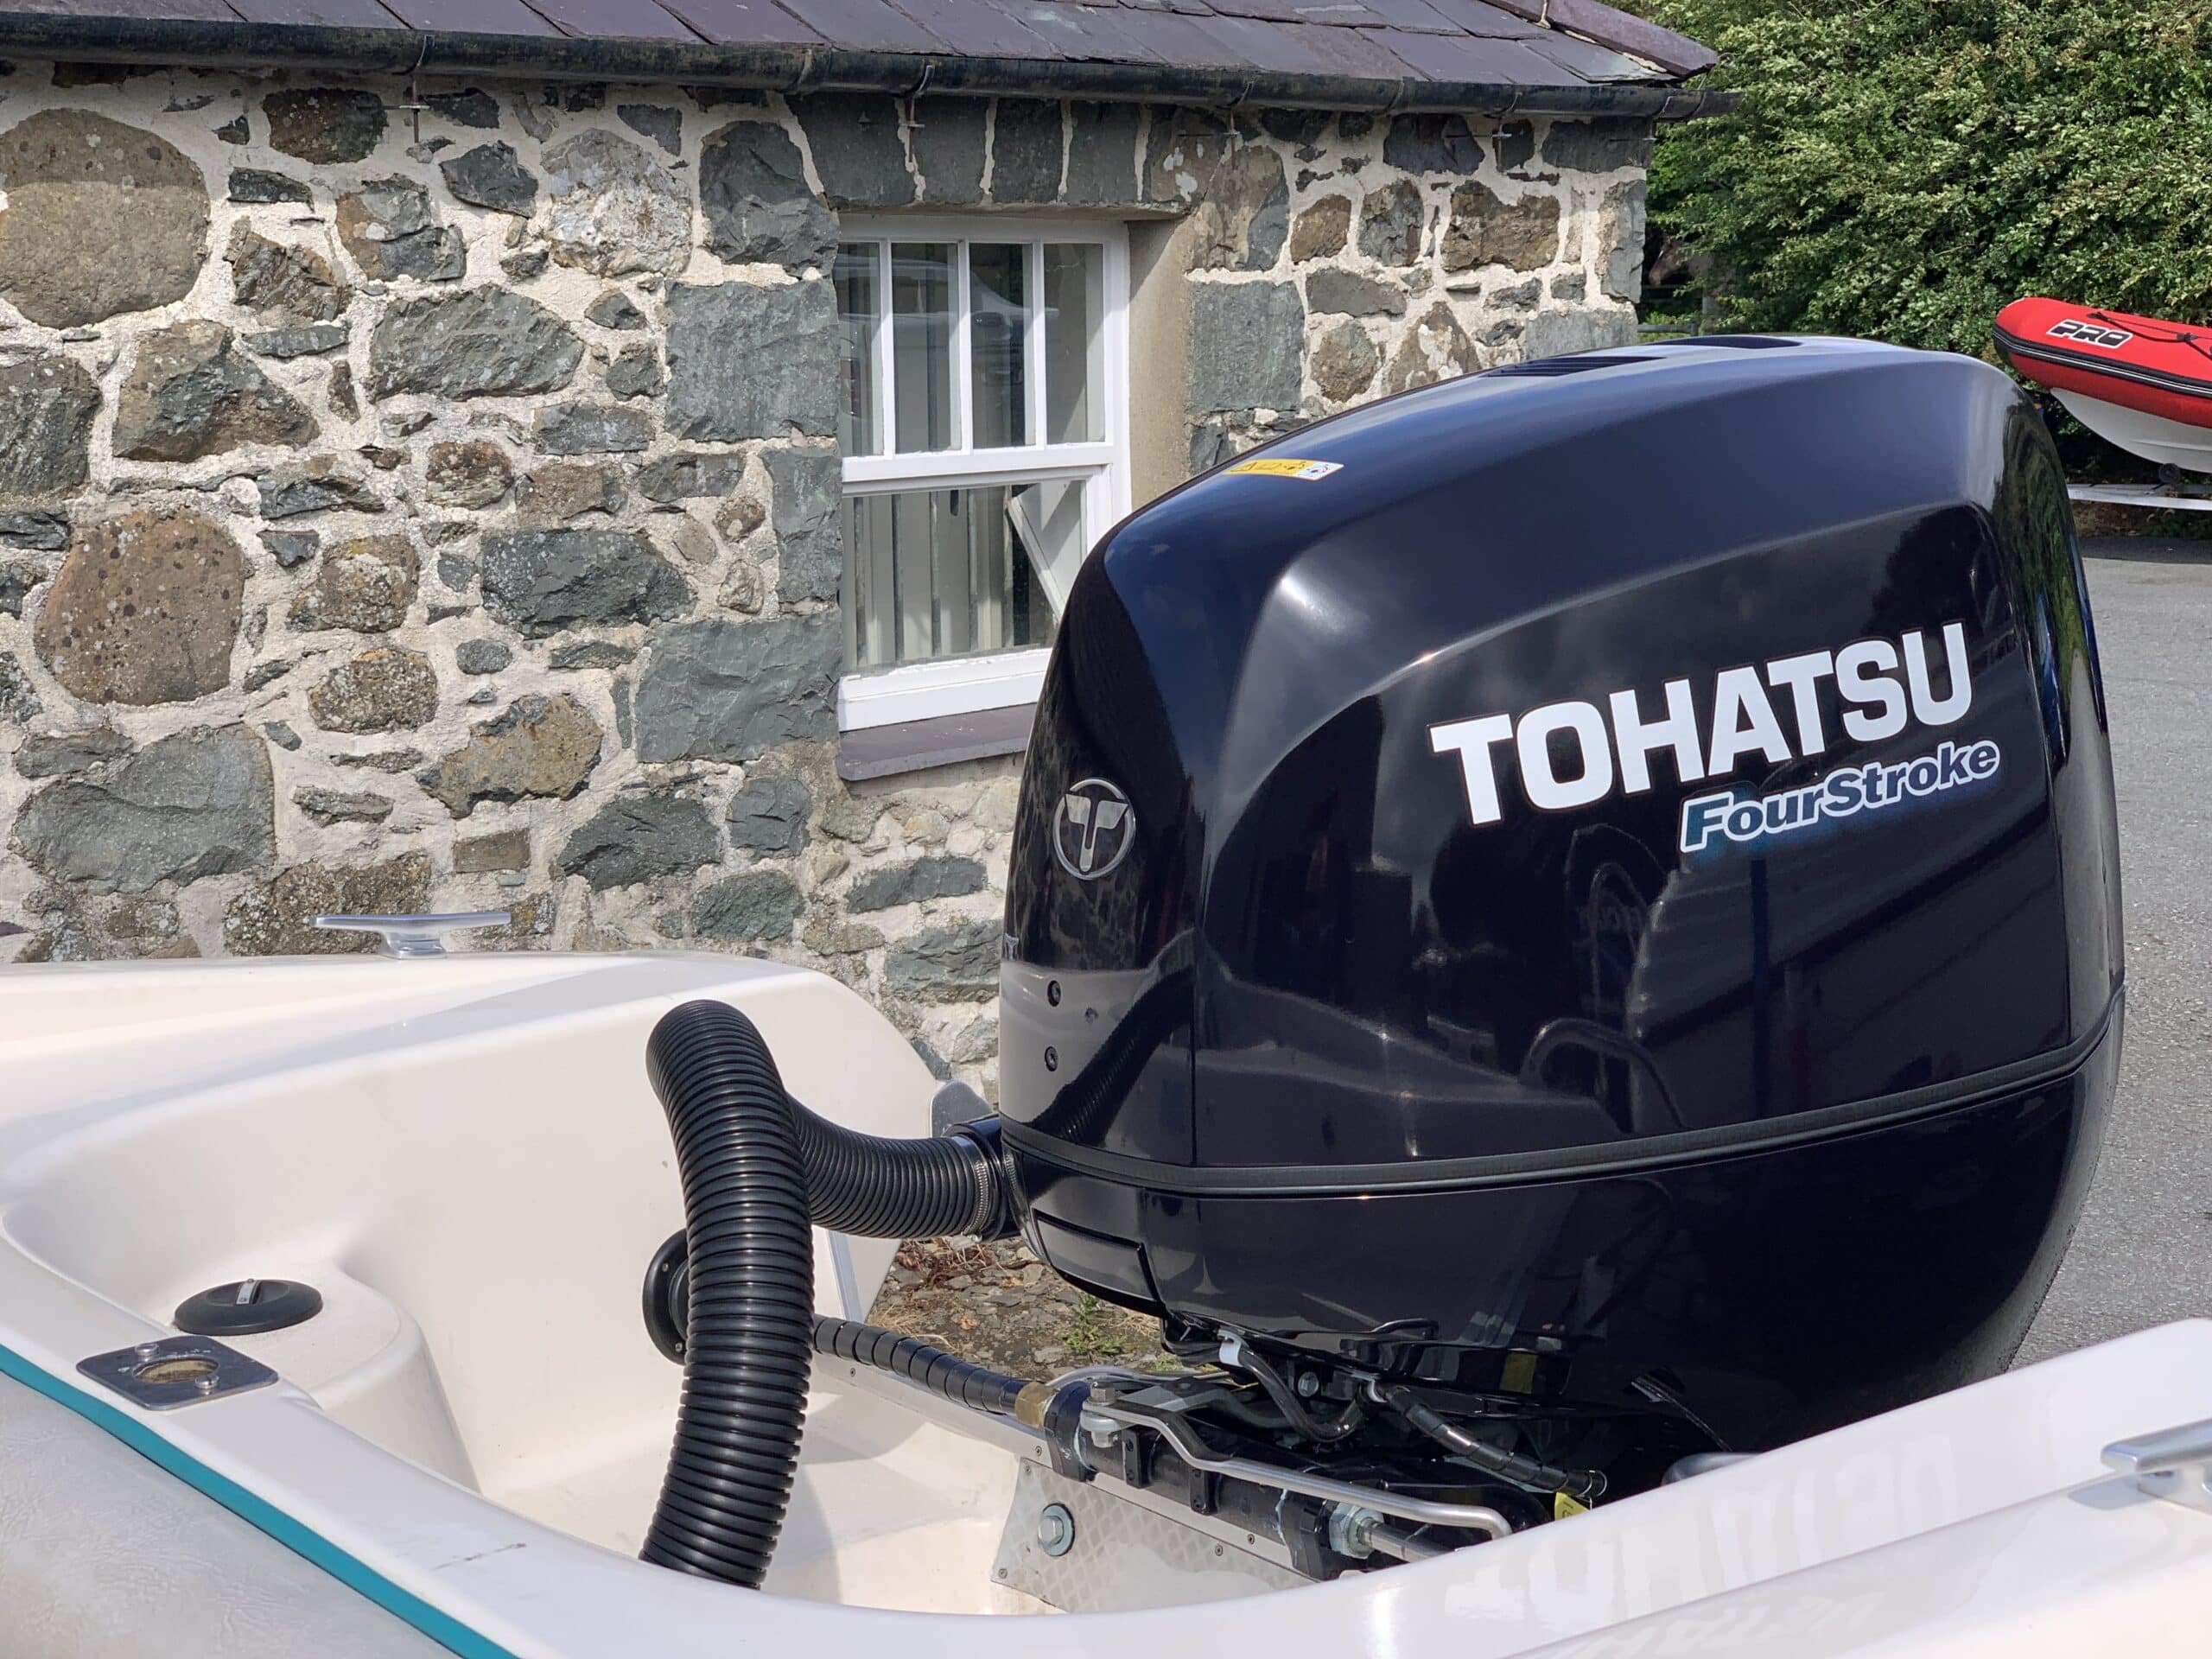 Outboard servicing